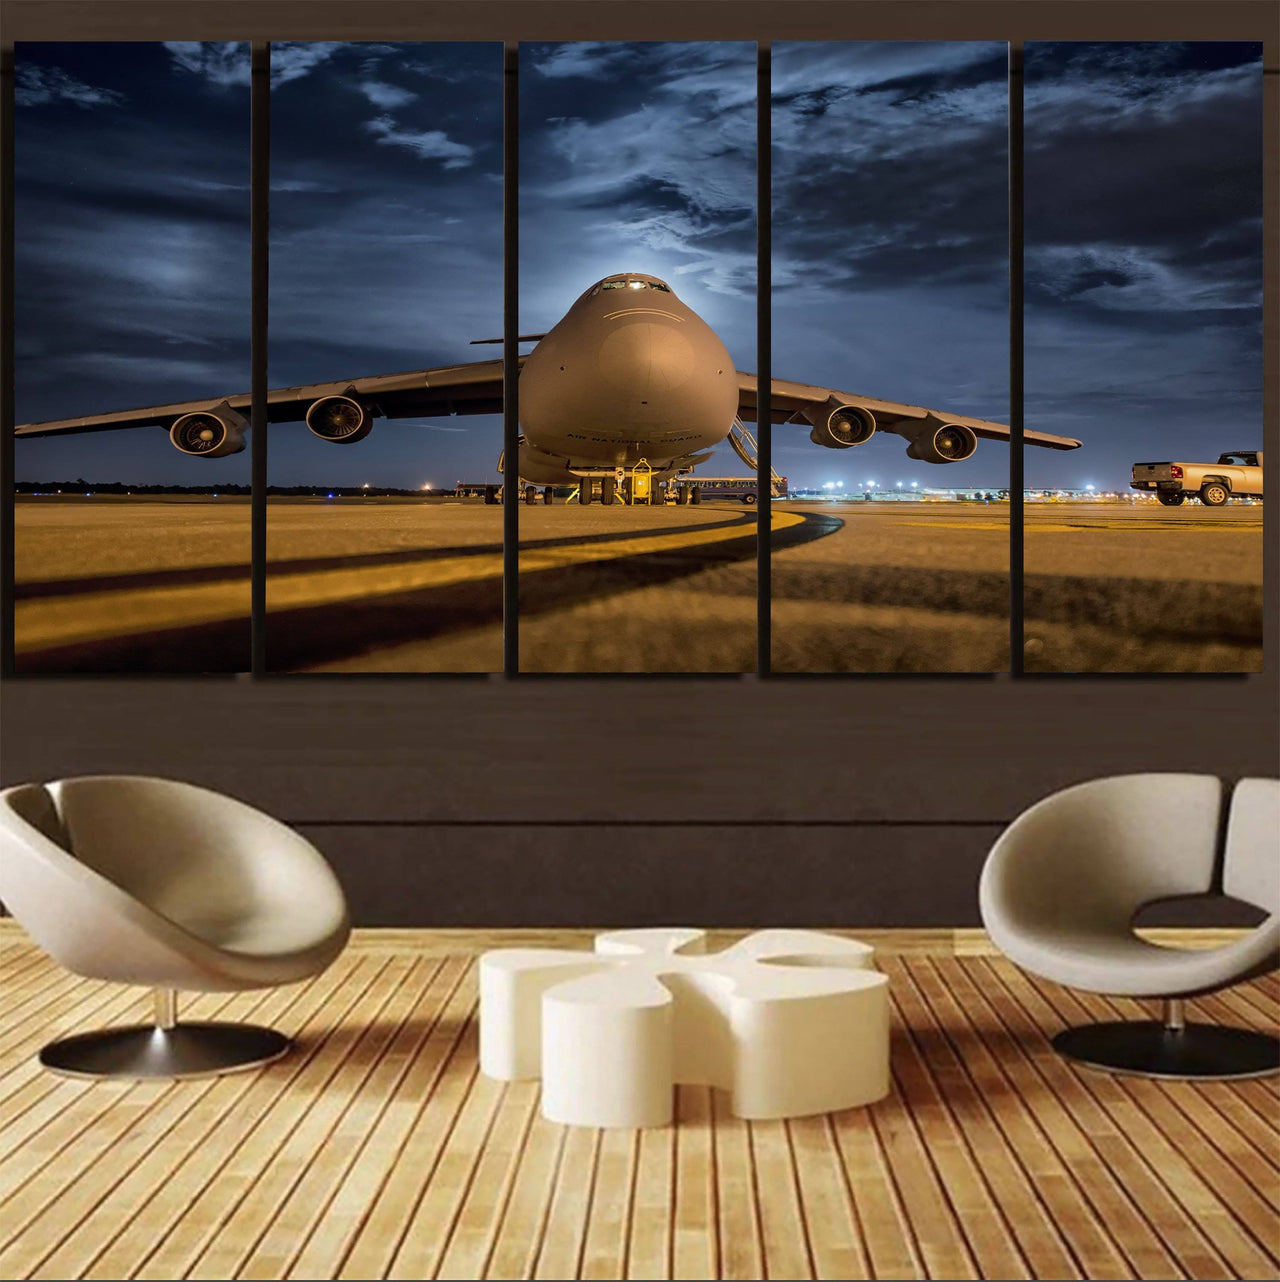 Amazing Military Aircraft at Night Printed Canvas Prints (5 Pieces) Aviation Shop 